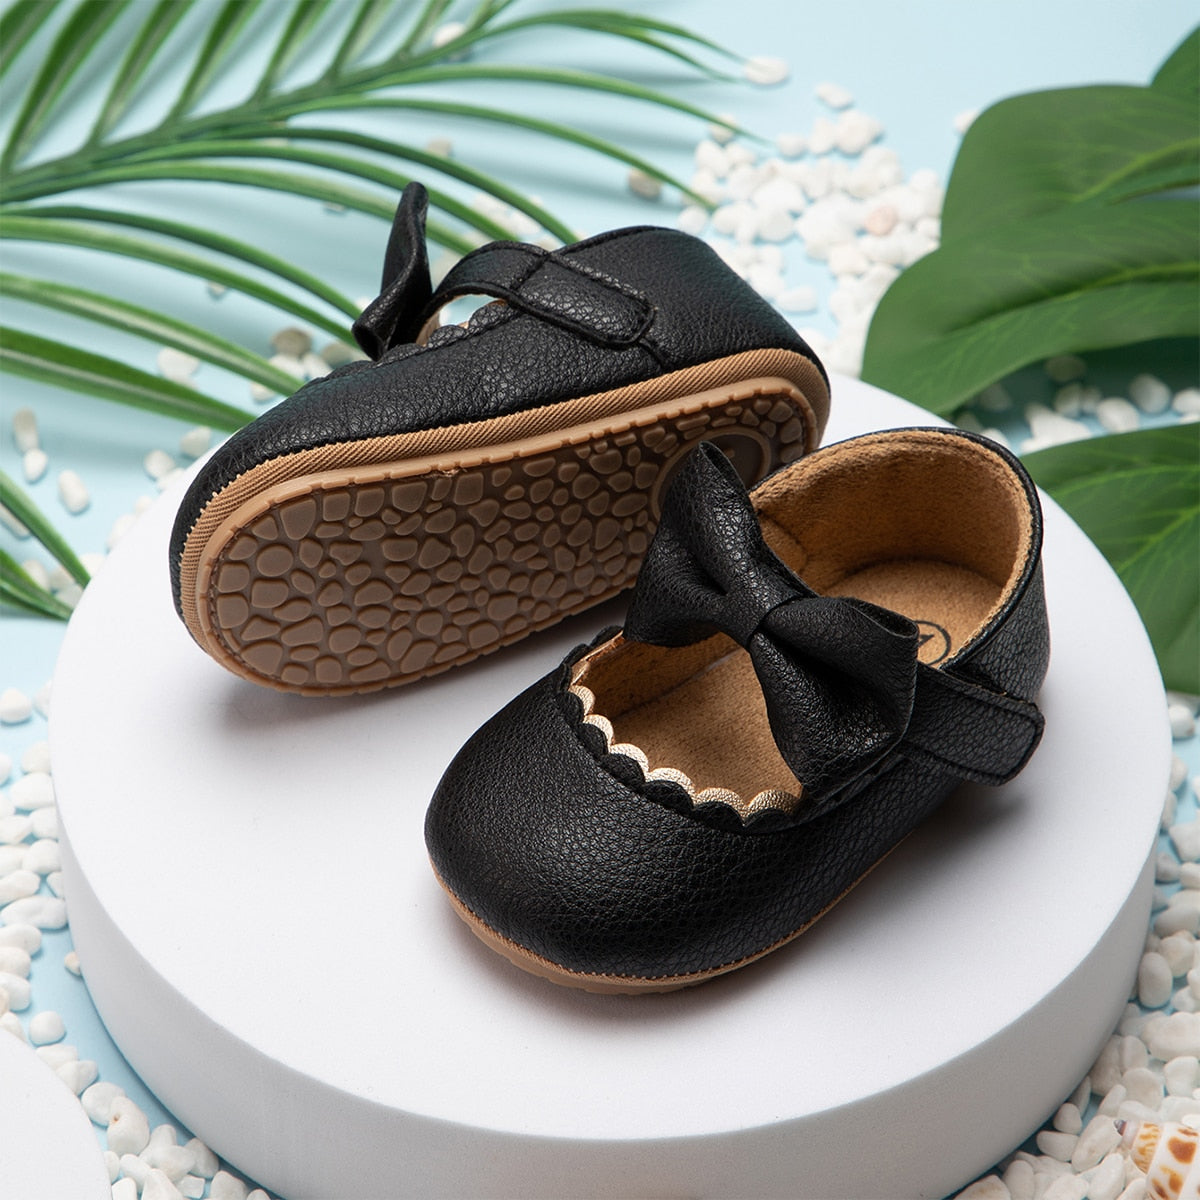 Baby, Toddler  Bowknot Non-slip Rubber Soft-Sole Flat PU Shoes